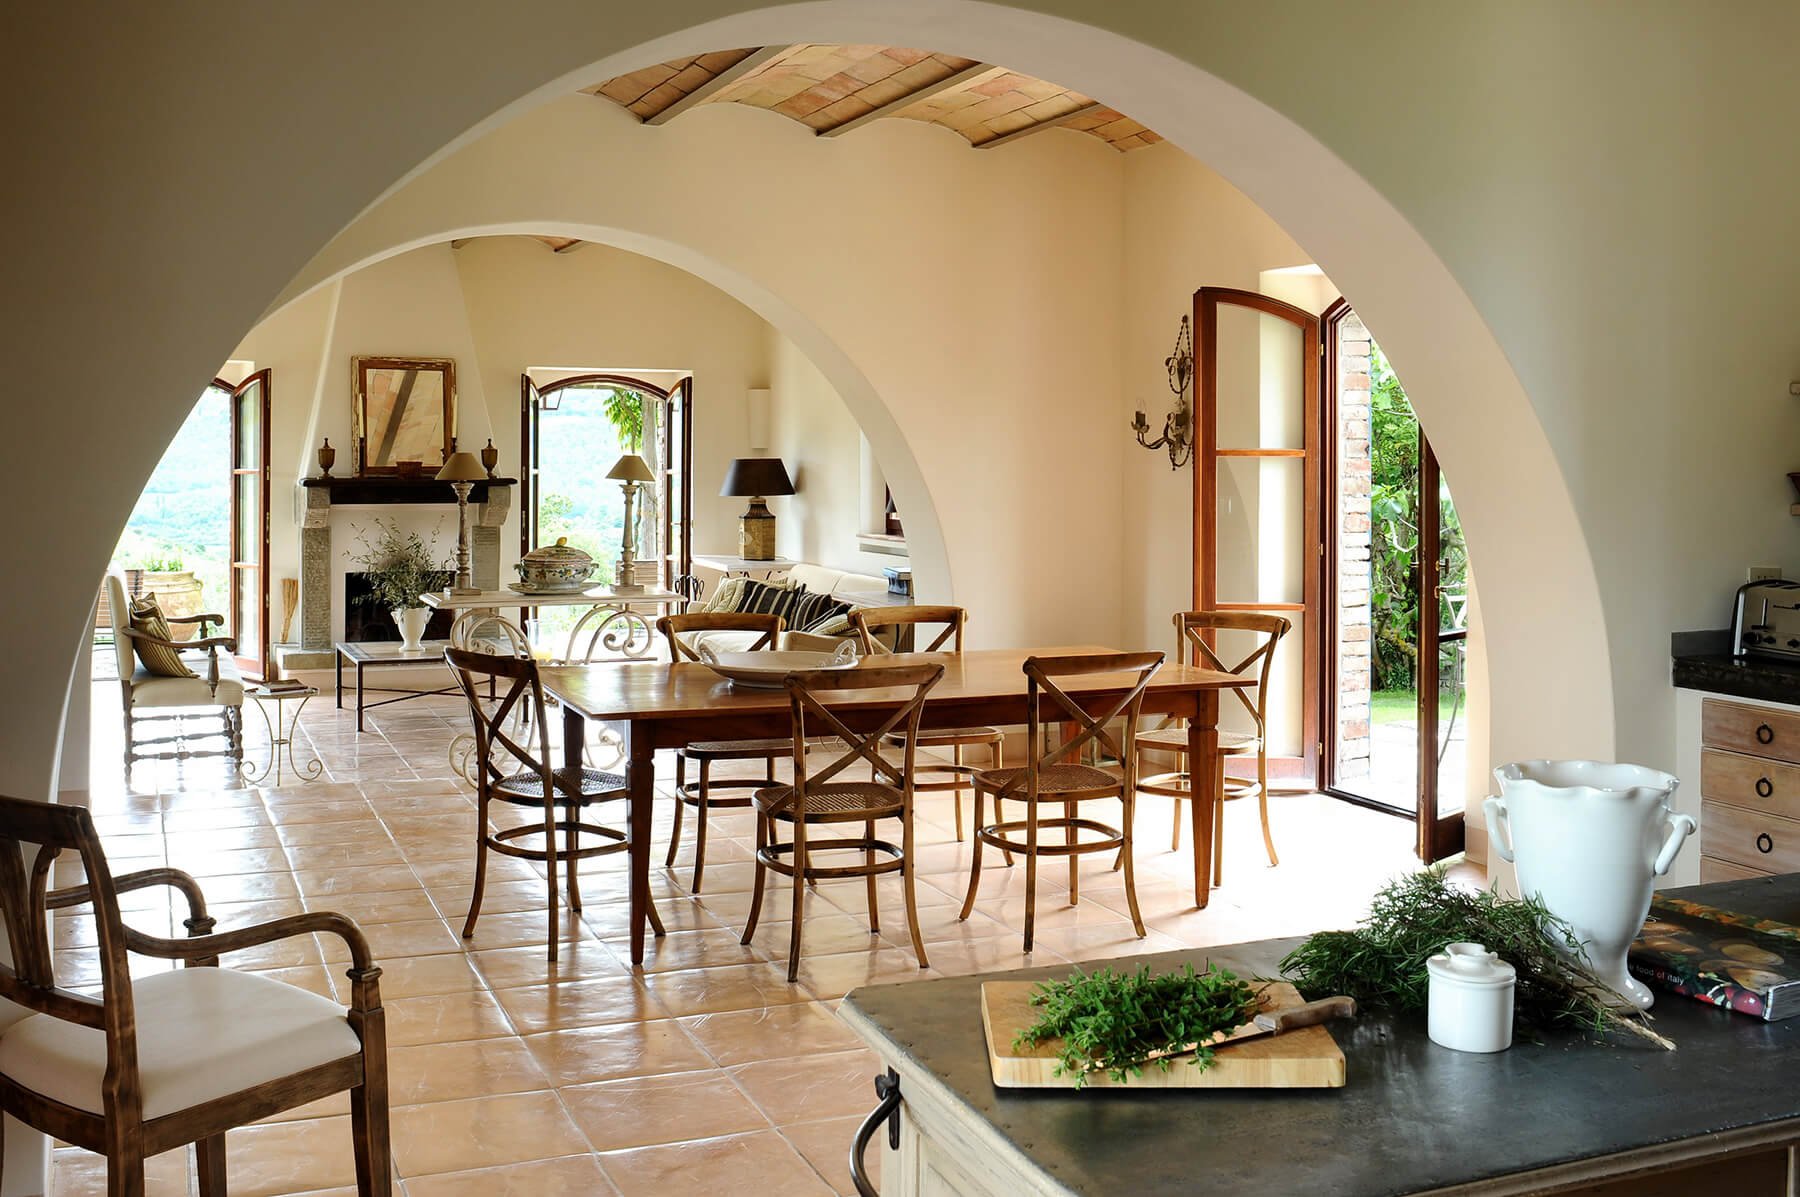 Francis York This Boutique Farmhouse in the Umbrian Hills is Available as a Luxury Villa Rental 17.jpg